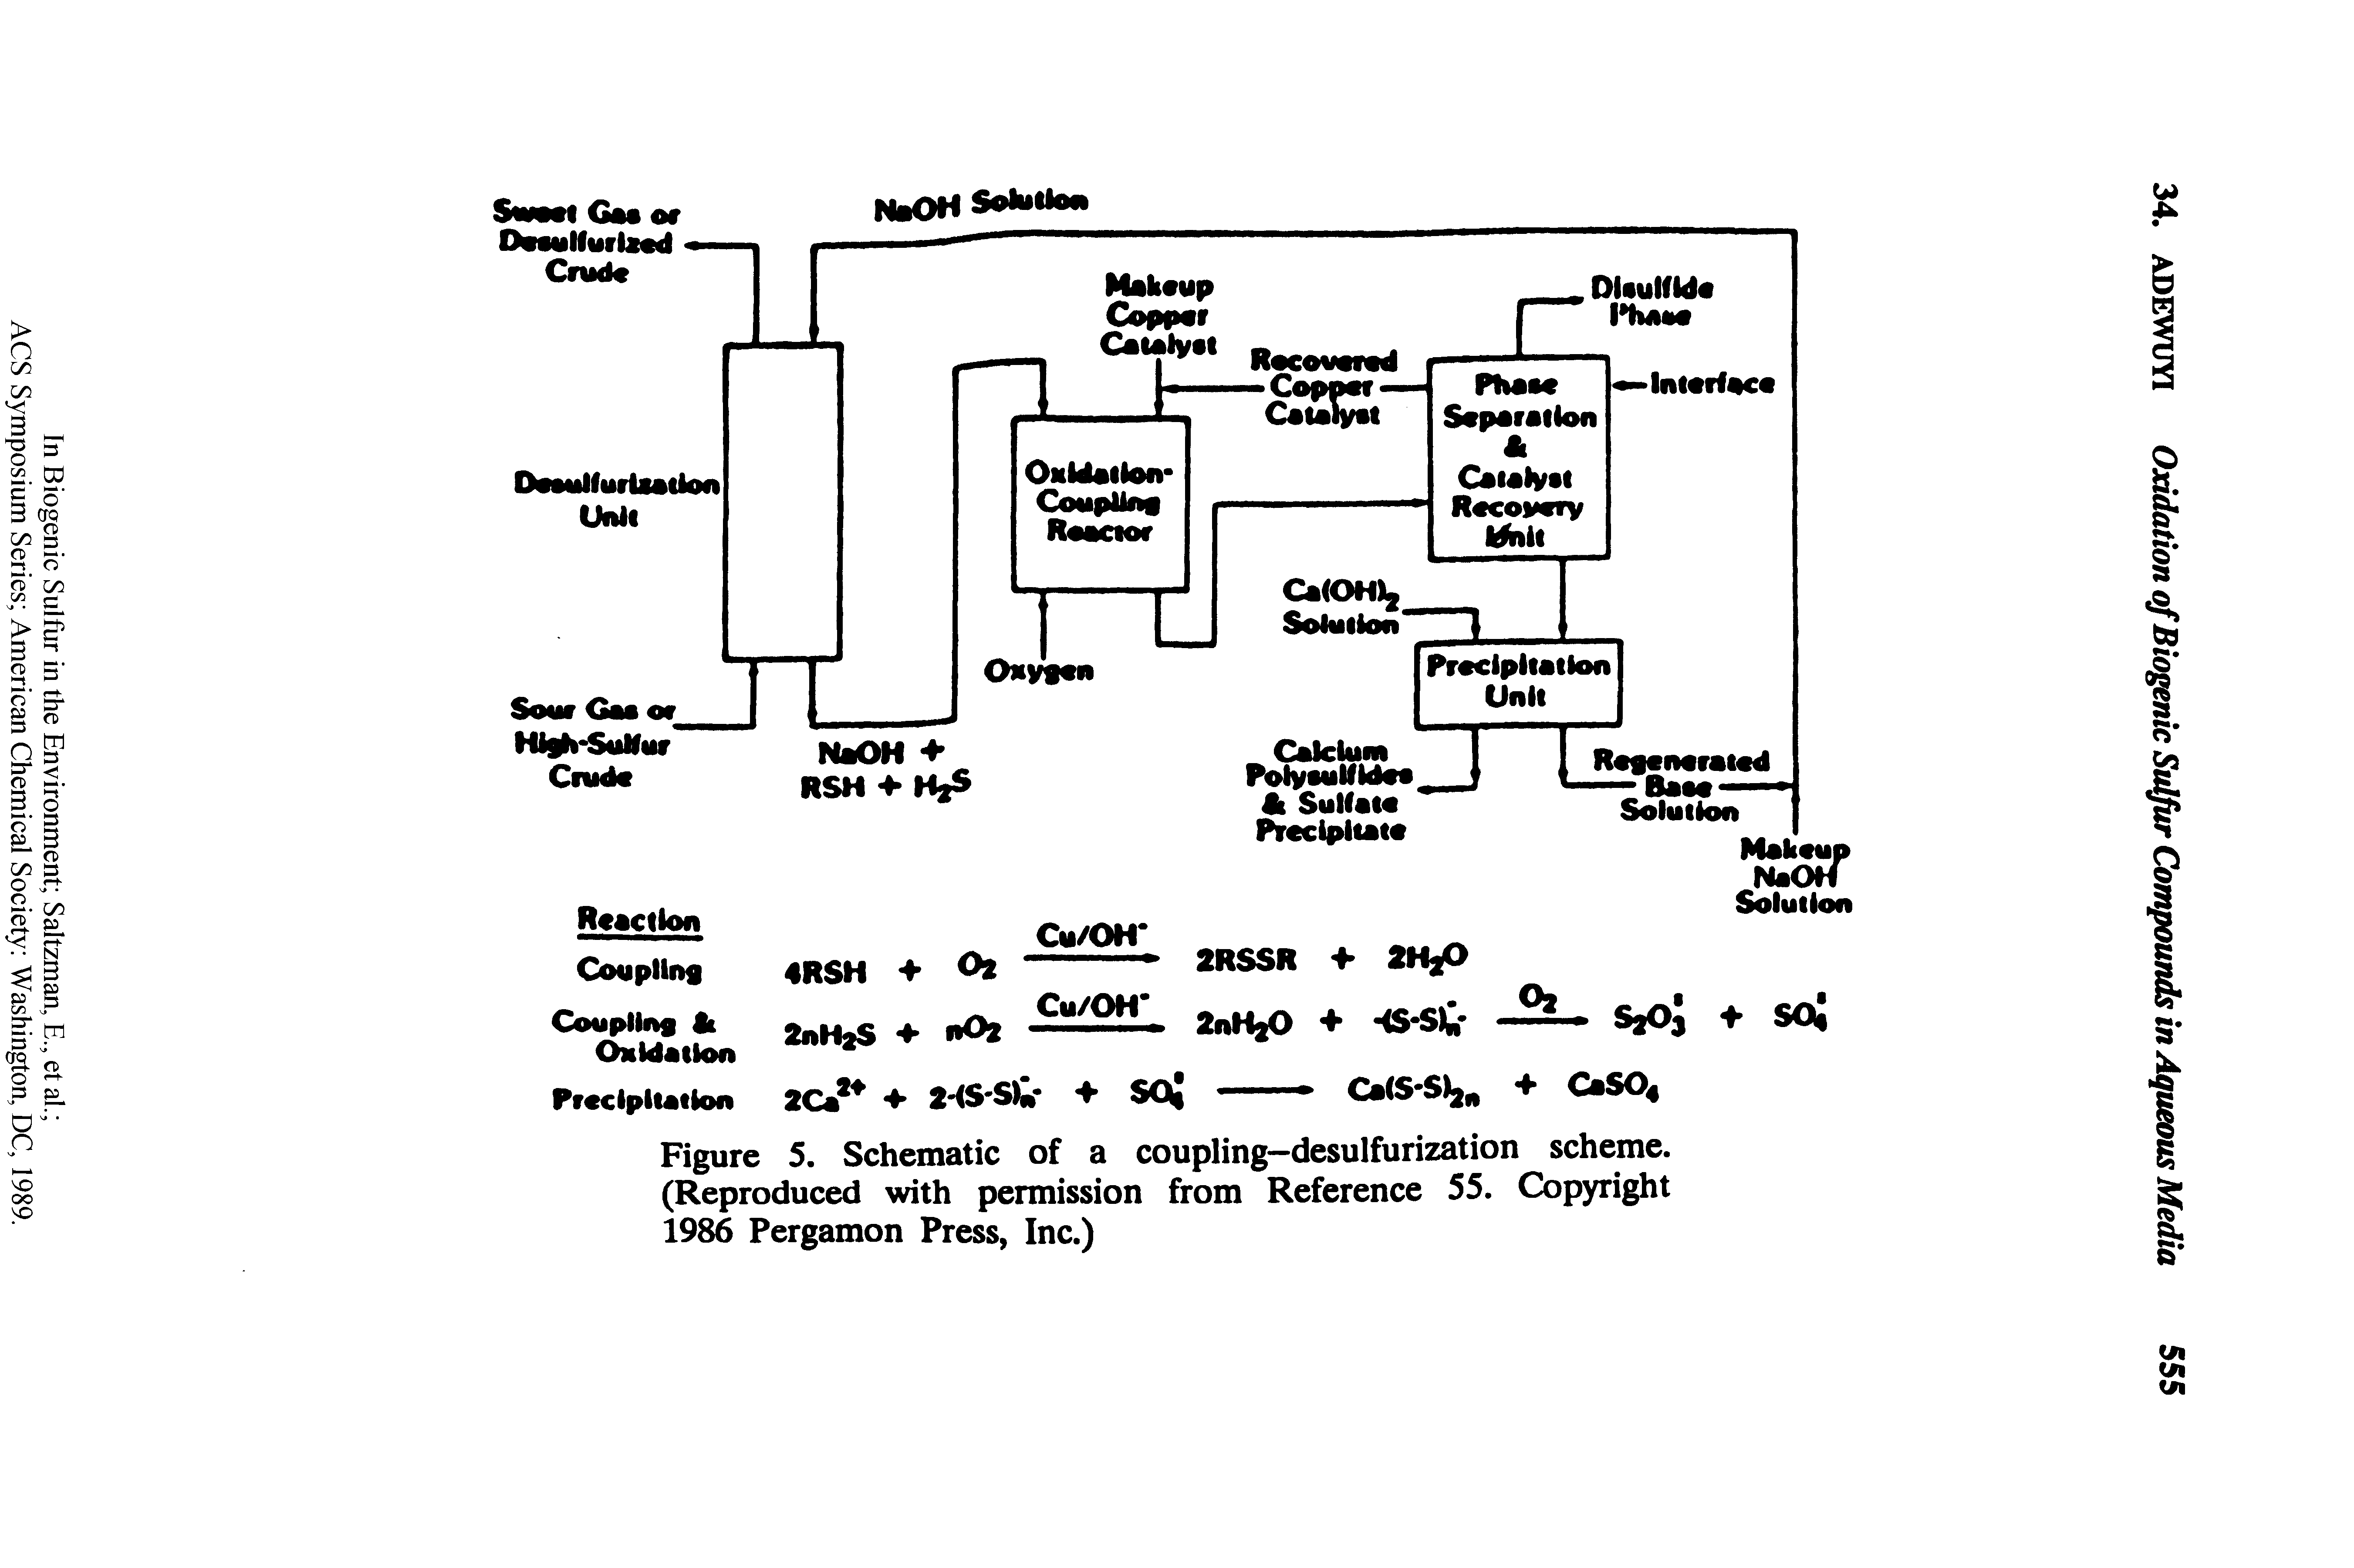 Figure 5. Schematic of a coupling—desulfurization scheme. (Reproduced with permission from Reference 55. Copyright 1986 Pergamon Press, Inc.)...